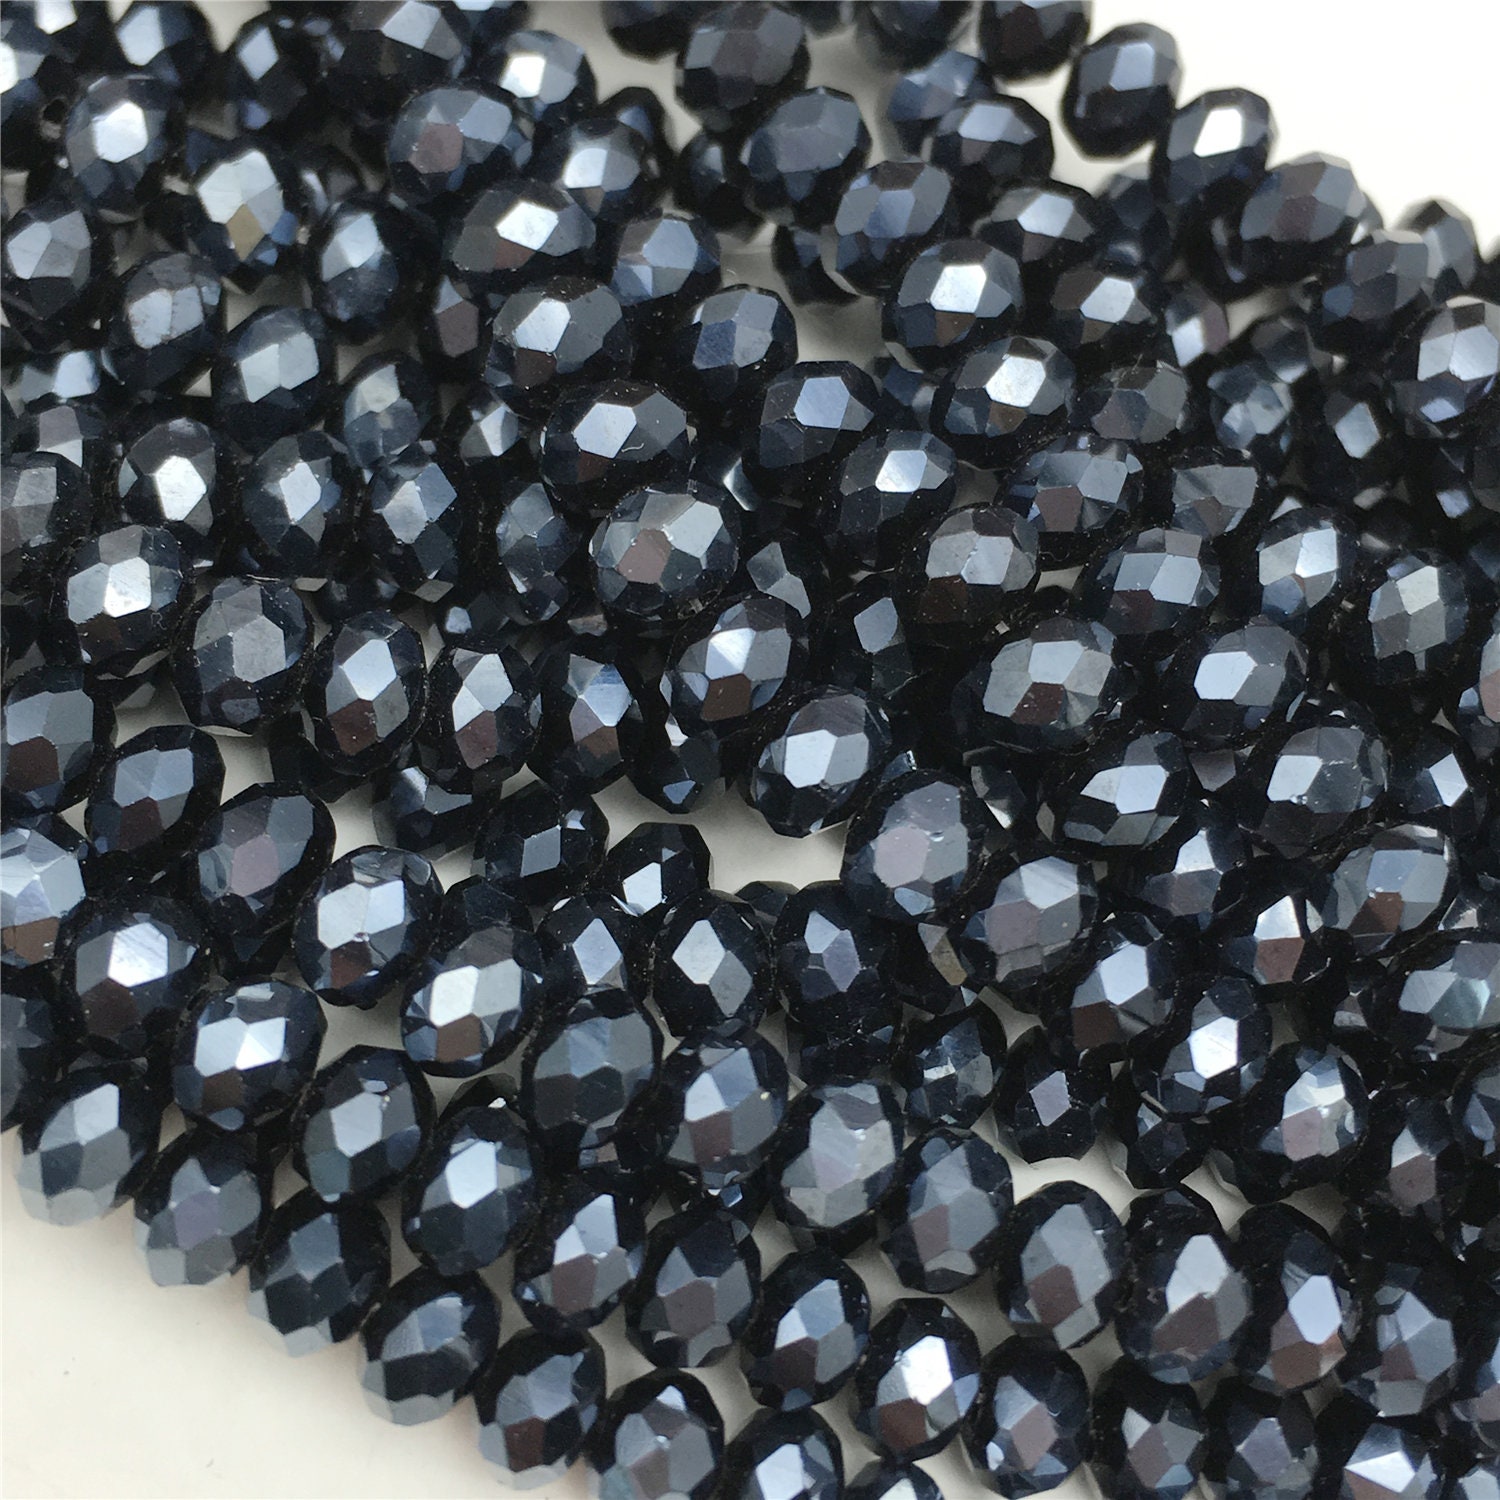 10 Cubic Zirconia Rondelle Roundel Beads 6mm Extremely Dark Blue #96221 